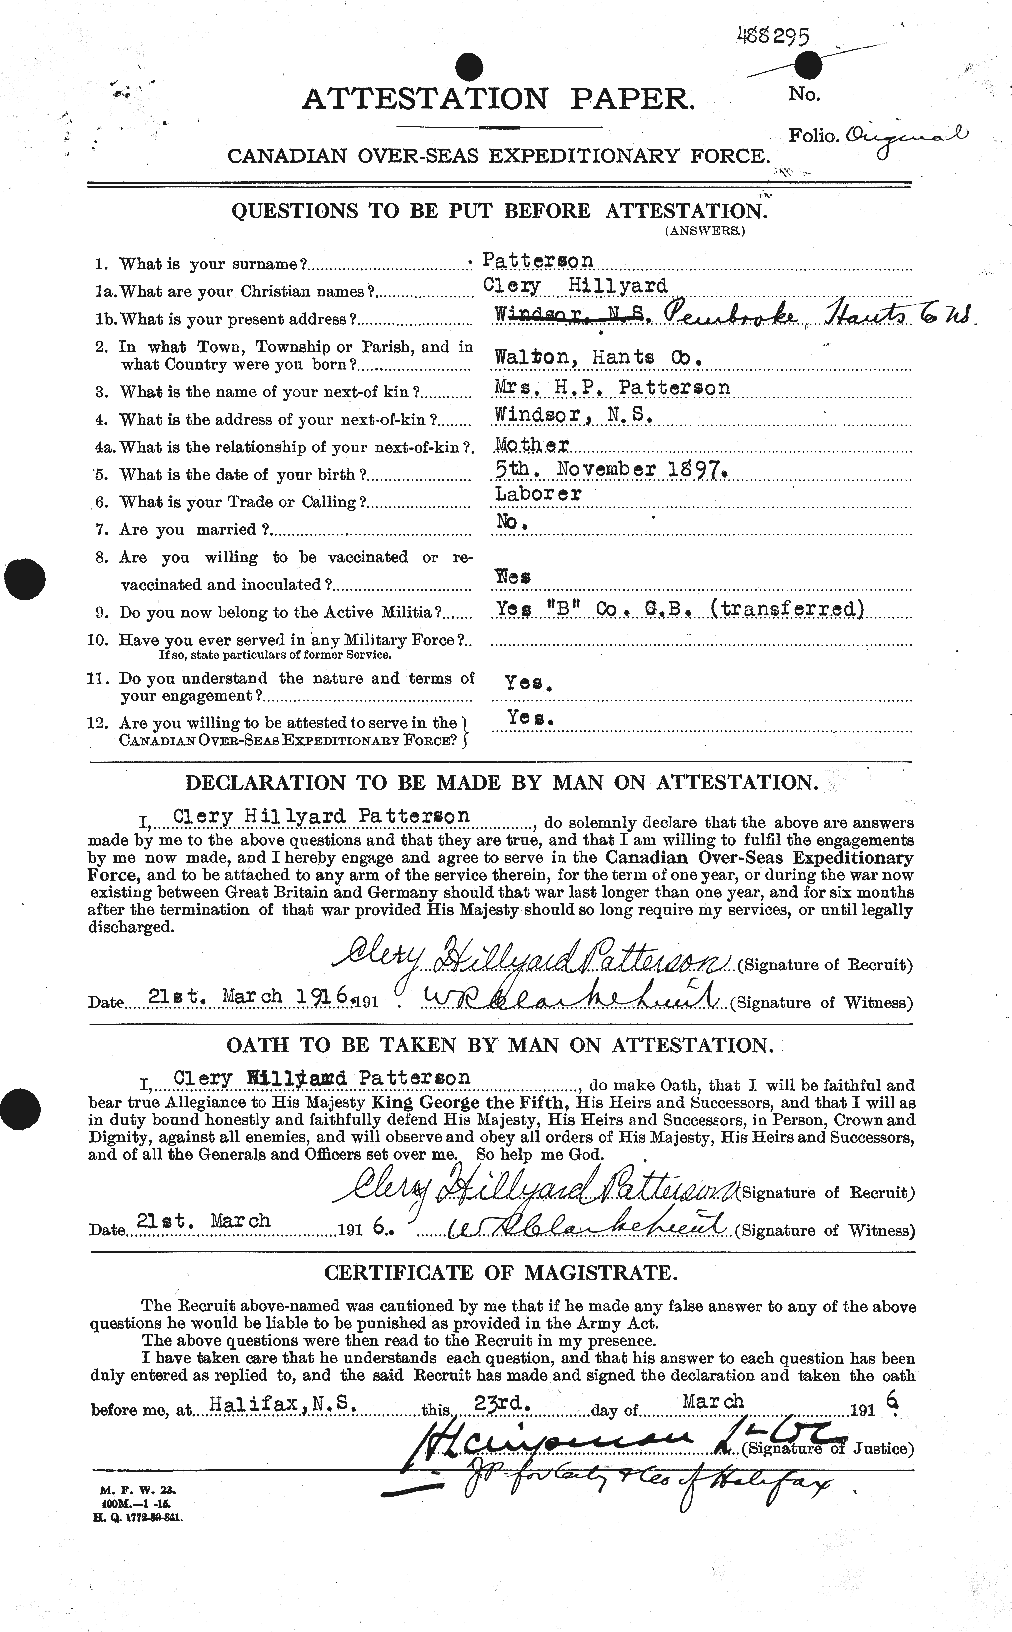 Personnel Records of the First World War - CEF 568303a